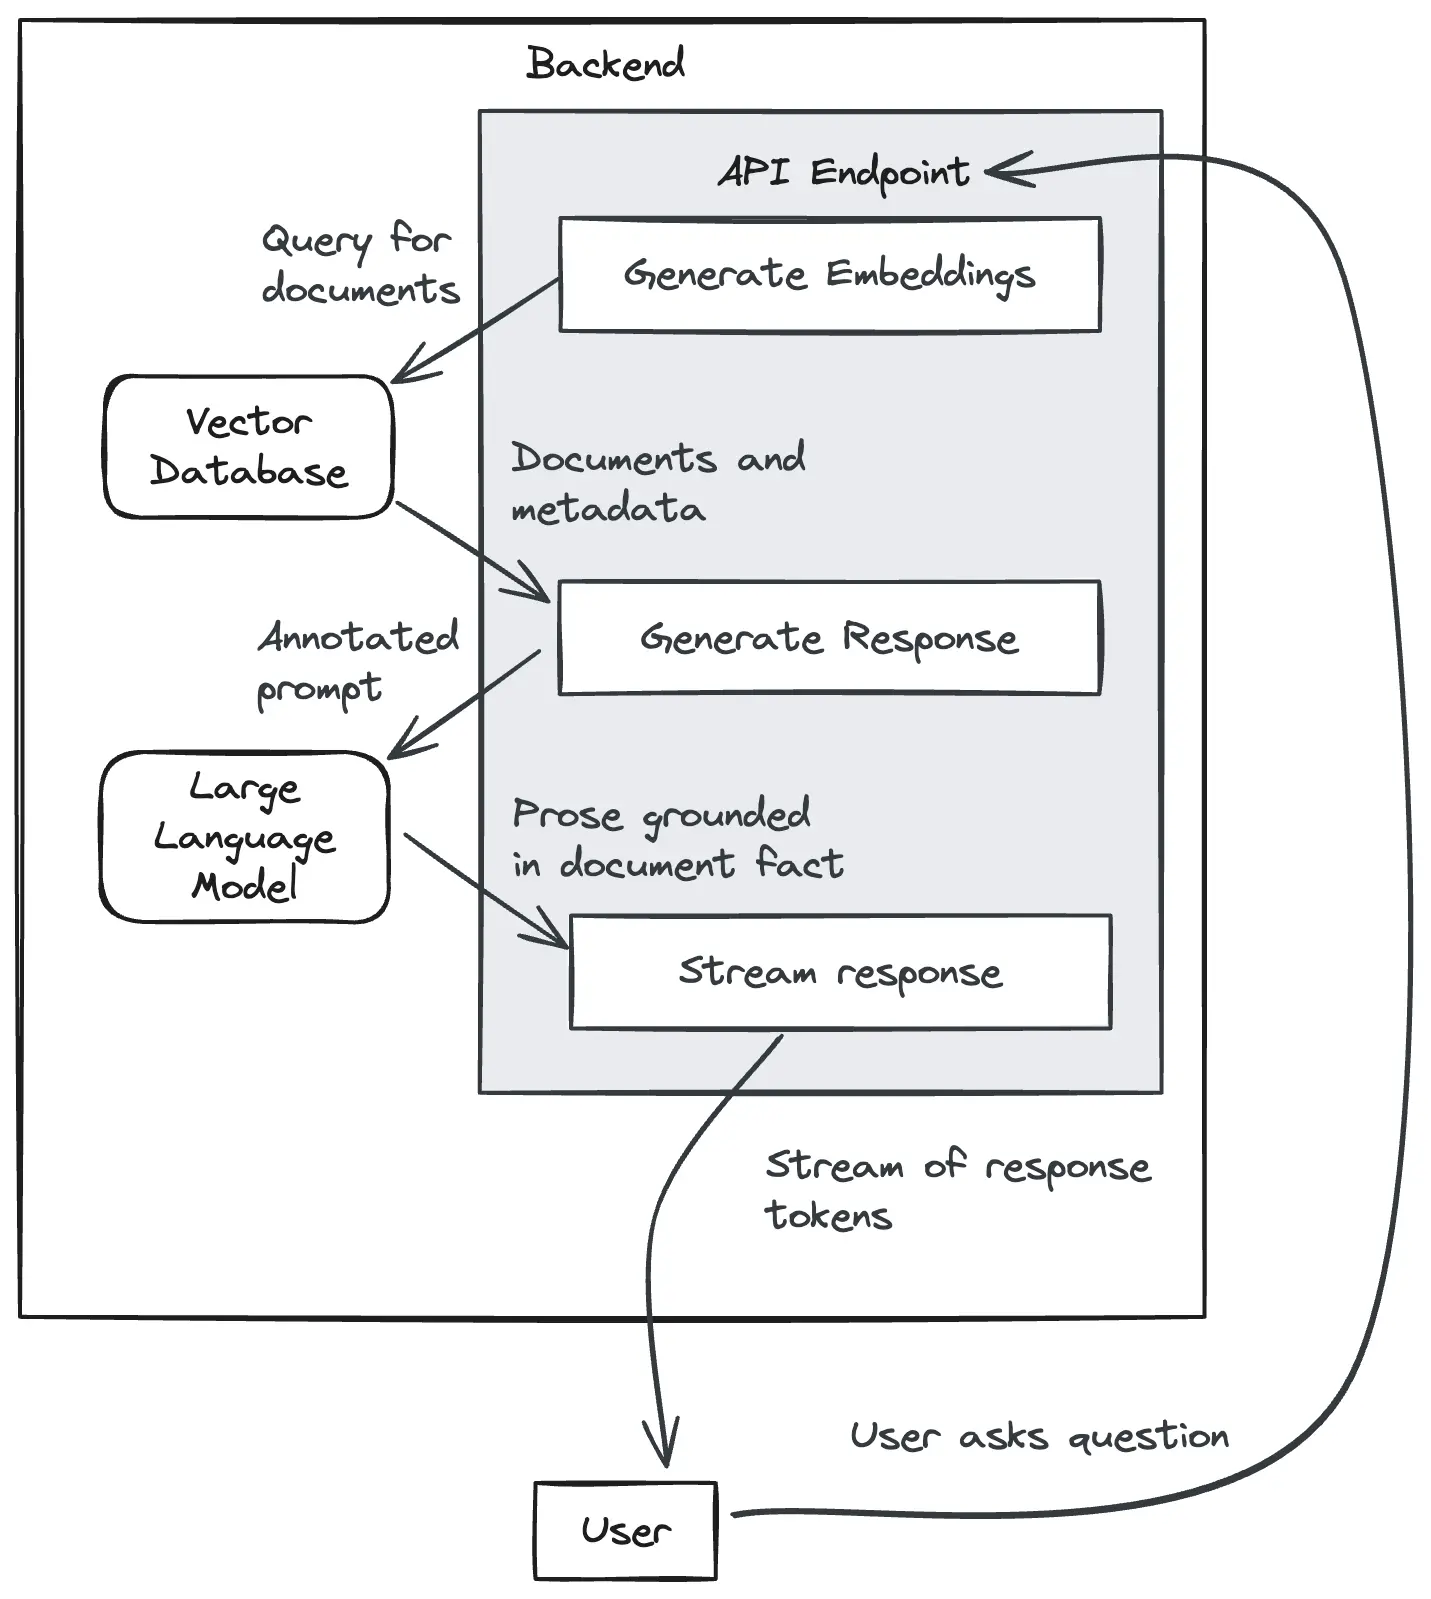 A diagram showing the full flow for doing document search Q&A with a vector database. The user submits a question to an API endpoint, the question is broken into embedding vectors and used to search for similar vectors in the database. The relevant document fragments are fed into the prompt for a large language model to generate a response that is grounded in the facts from the documents that were ingested. The response is streamed to the user one token at a time.